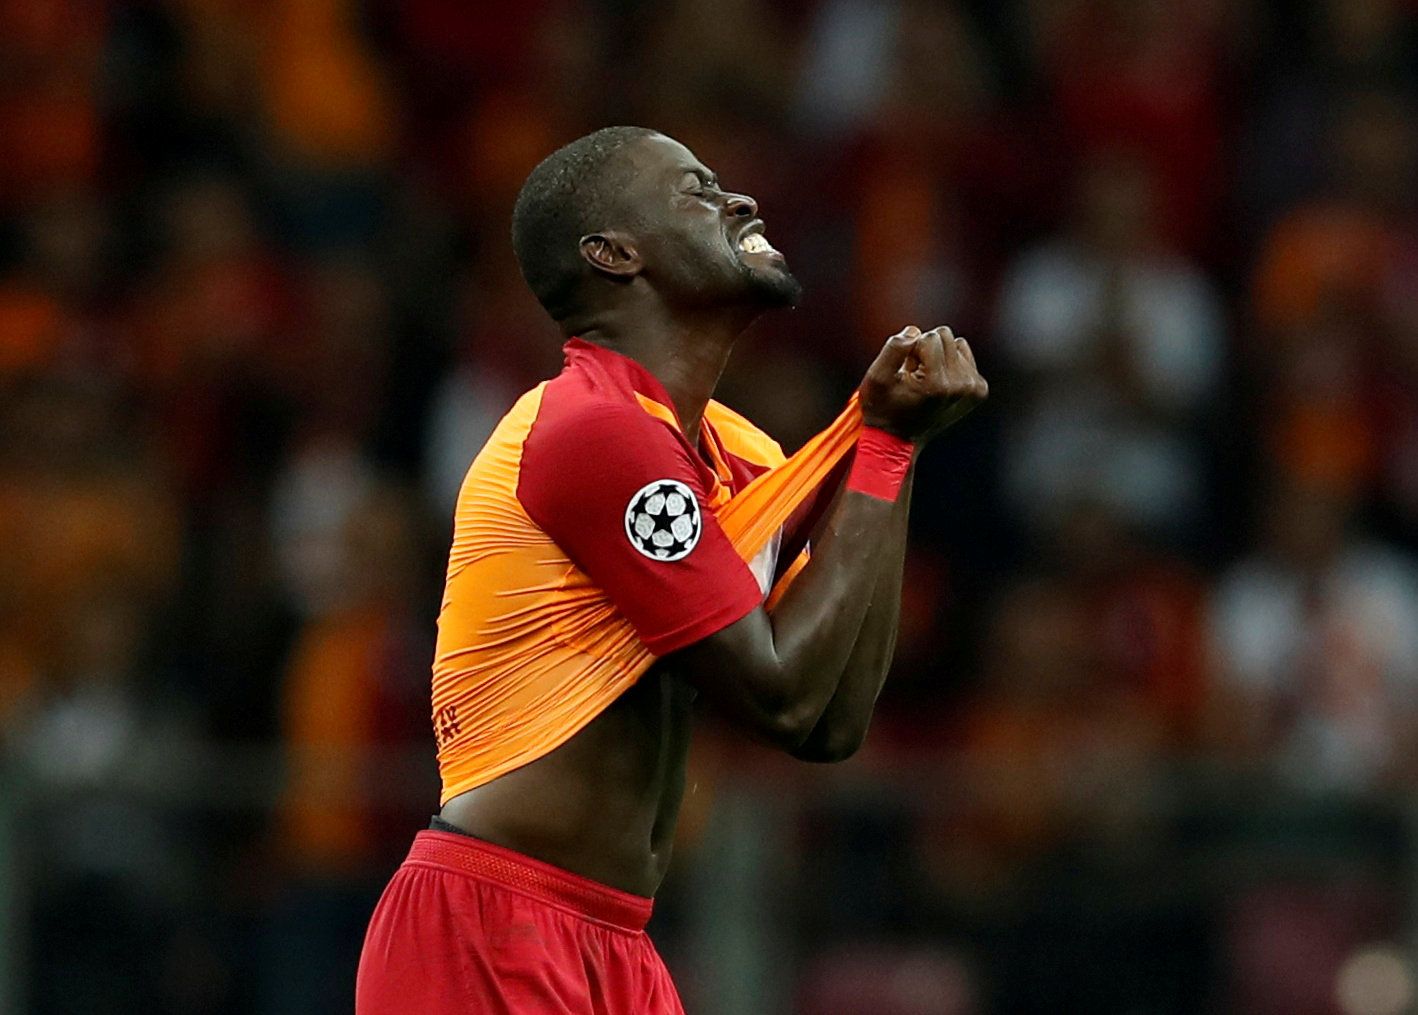 Soccer Football - Champions League - Group Stage - Group D - Galatasaray v Lokomotiv Moscow - Ali Sami Yen Spor Kompleksi, Istanbul, Turkey - September 18, 2018  Galatasaray's Badou Ndiaye reacts after being shown a red card  REUTERS/Murad Sezer      TPX IMAGES OF THE DAY